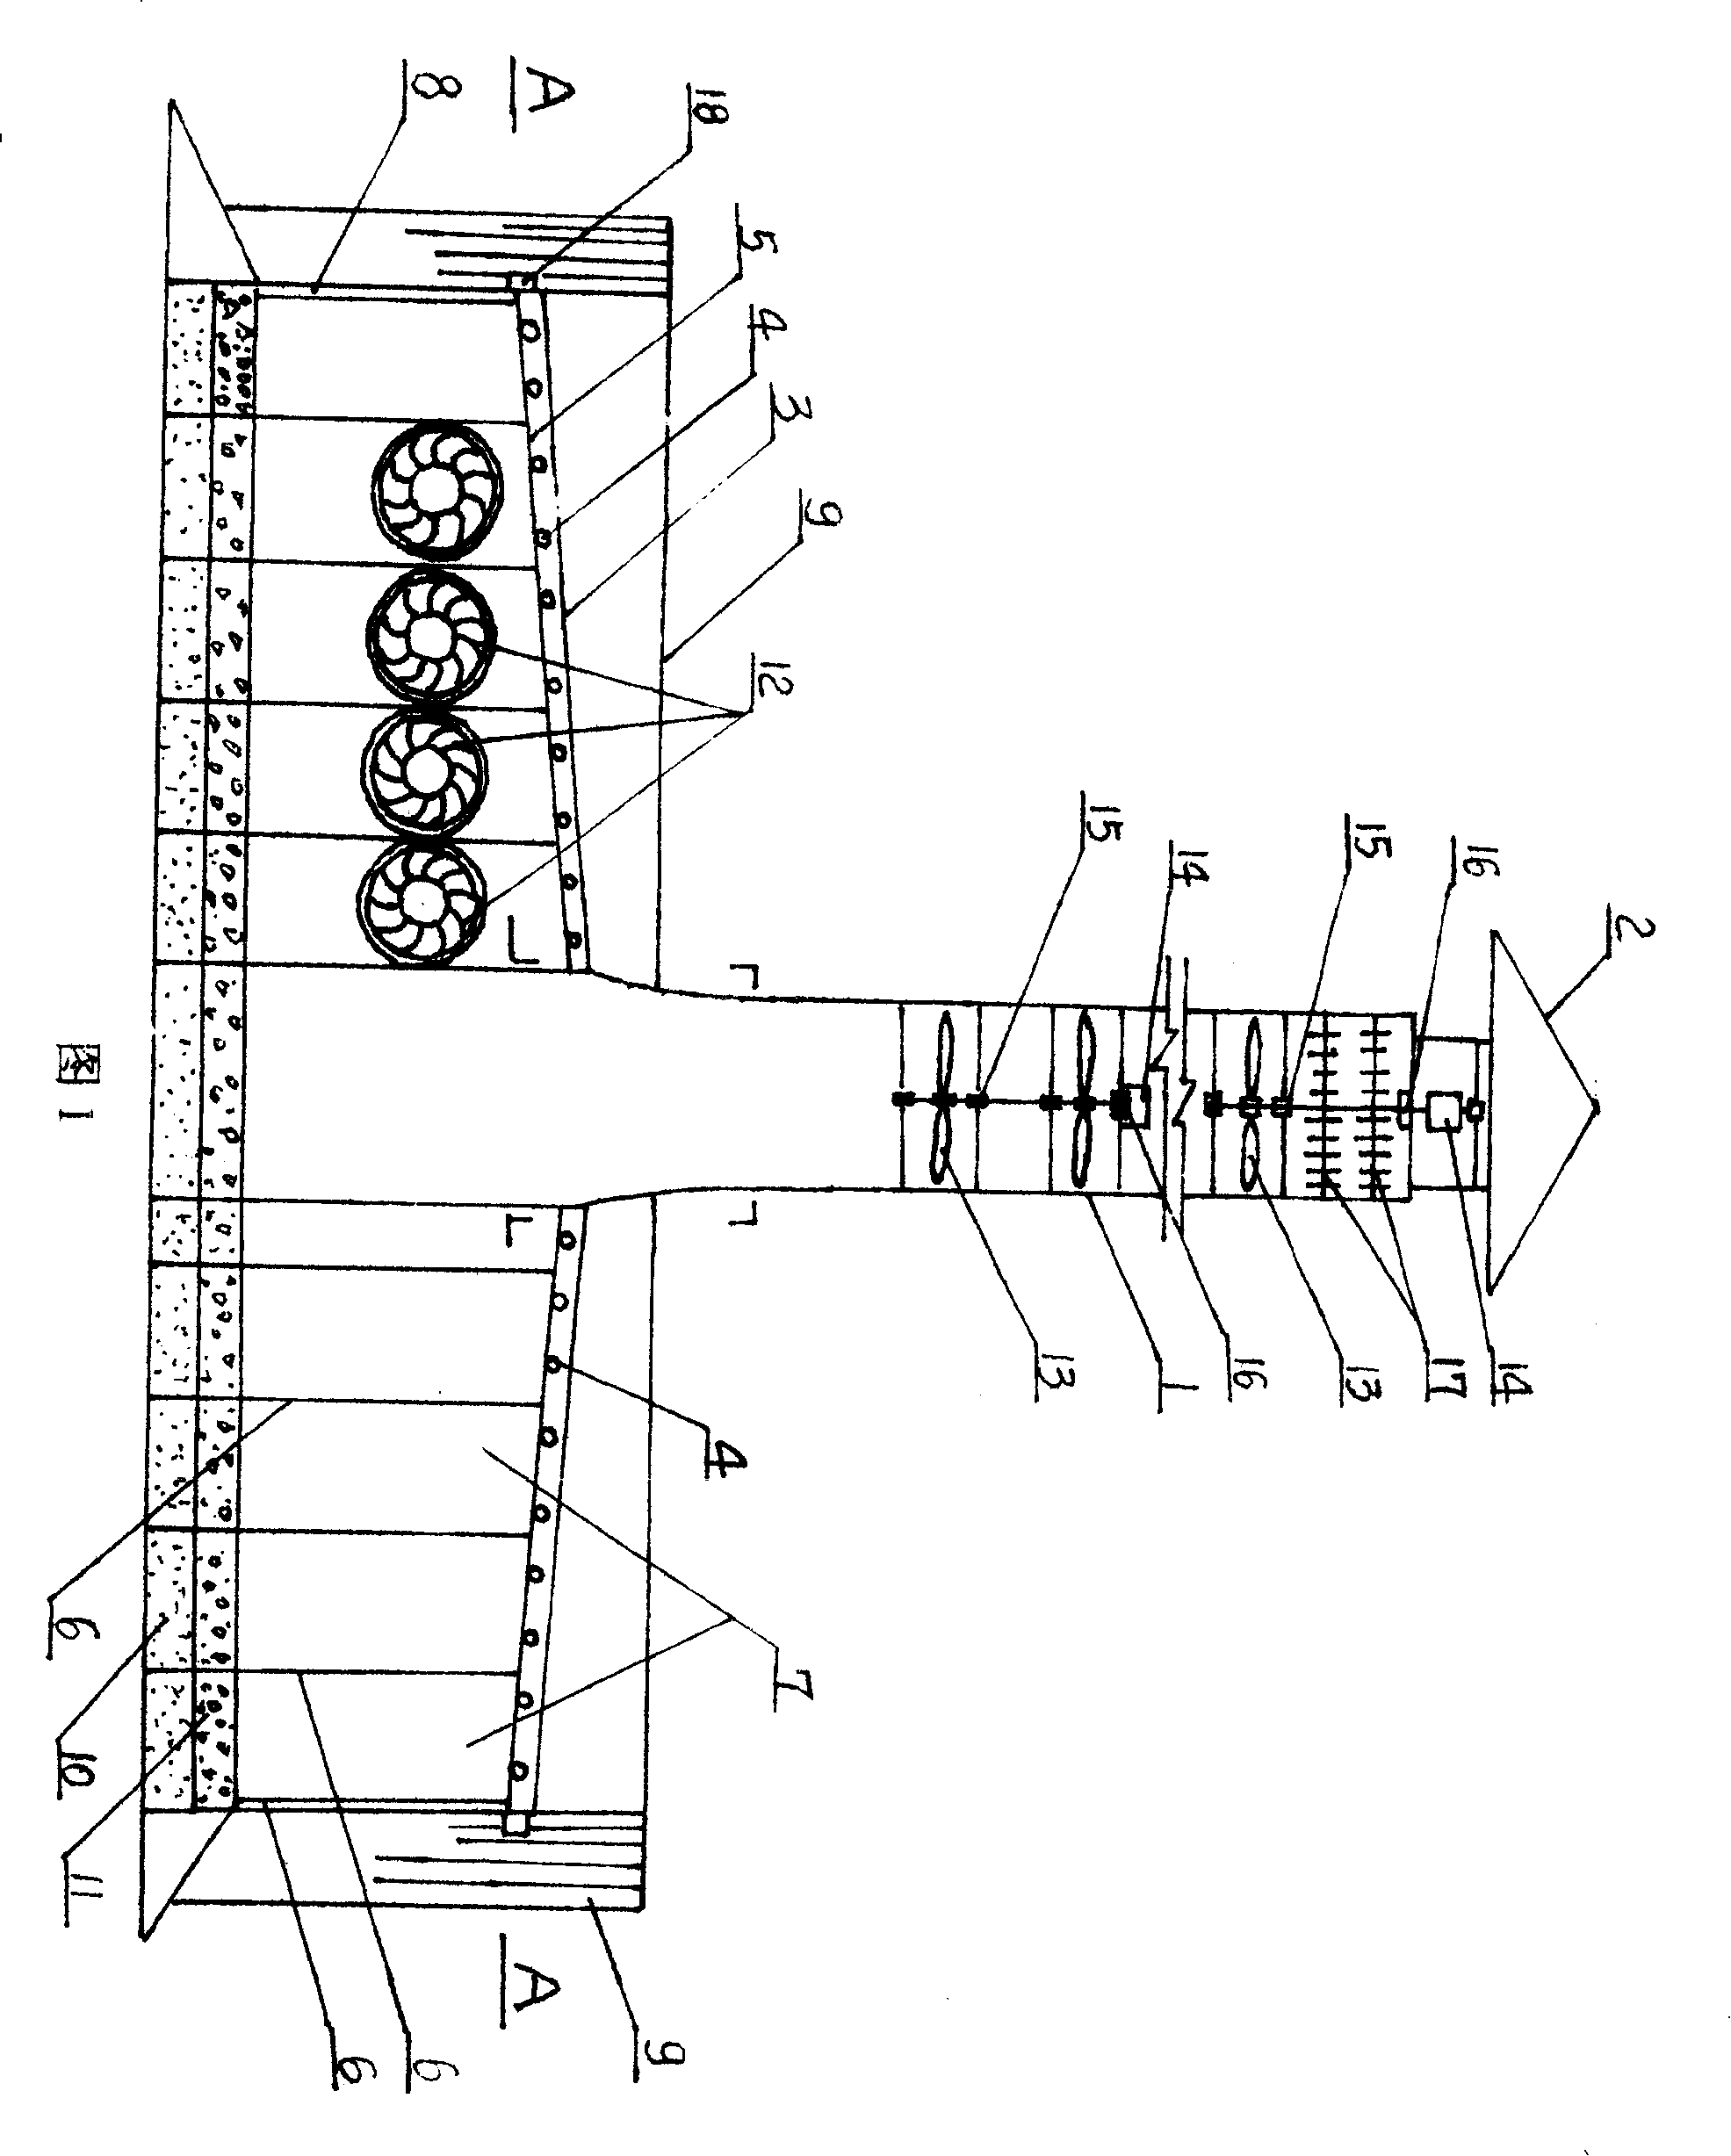 Apparatus for electricity generation by refuse incineration and hot air flow